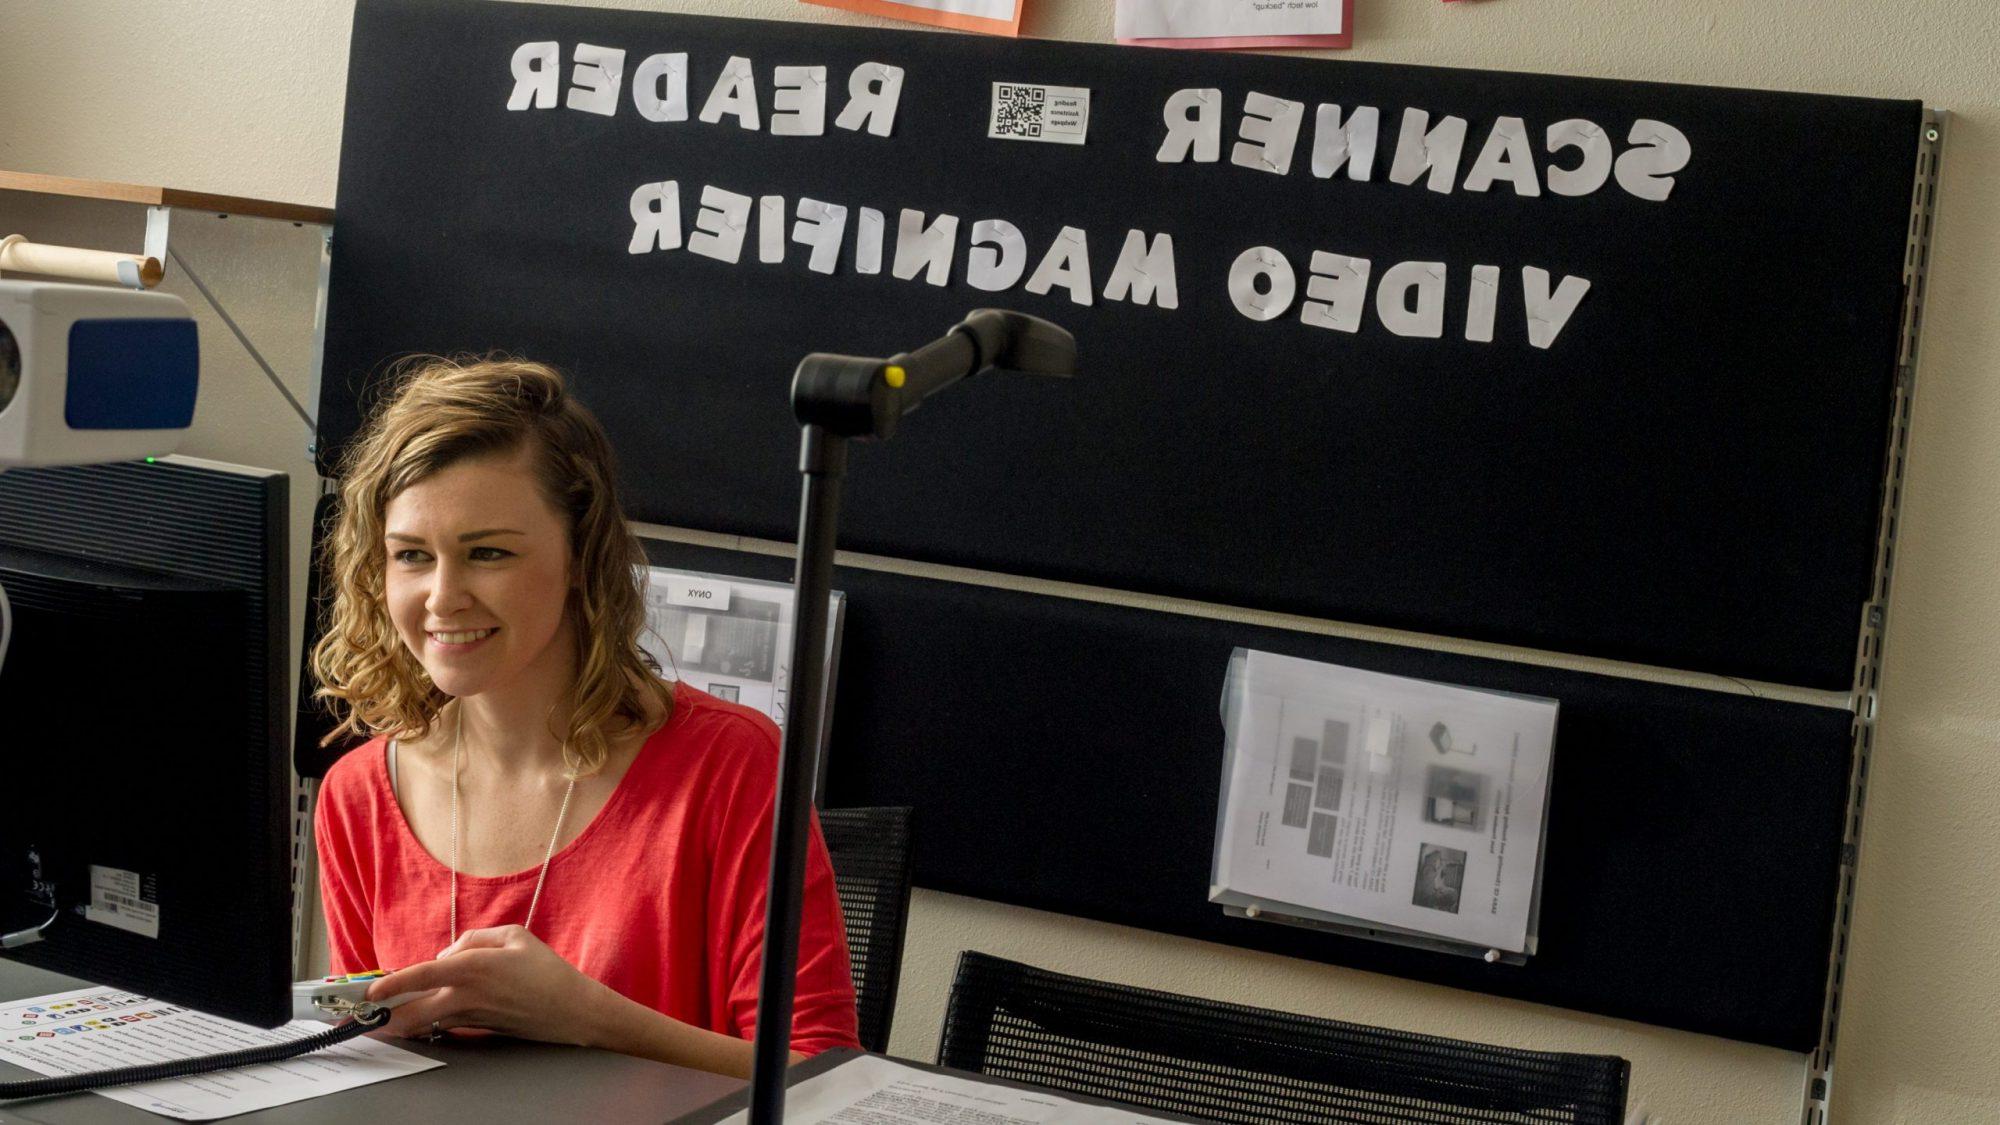 A female student in front of a sign that says scanner reader video magnifier.